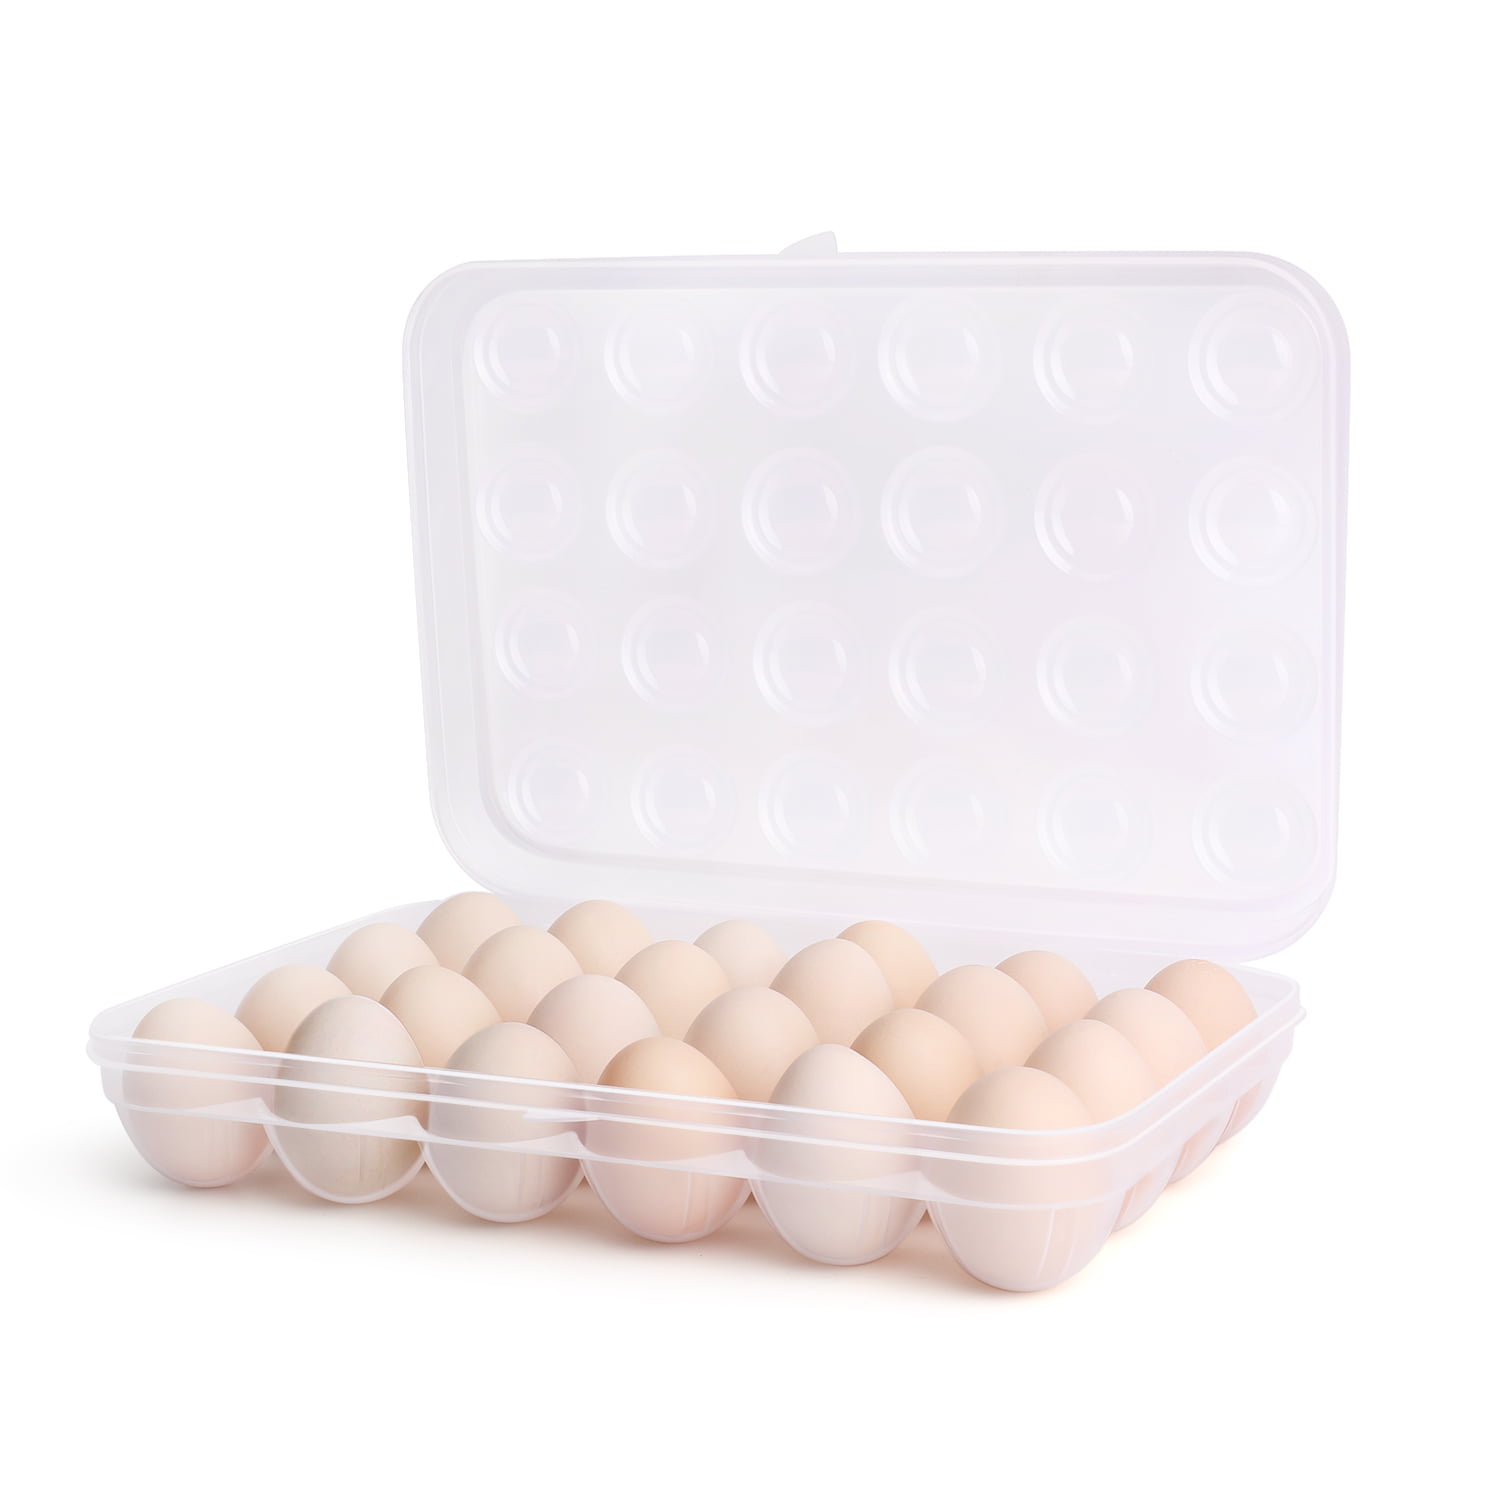 50 PCS 6 Girds Plastic Egg Cartons,Plastic Clear Egg Trays,Recyclable Plastic Egg Carton Stackable for Storing Eggs for Kitchen,Groceries,Market or Farmers